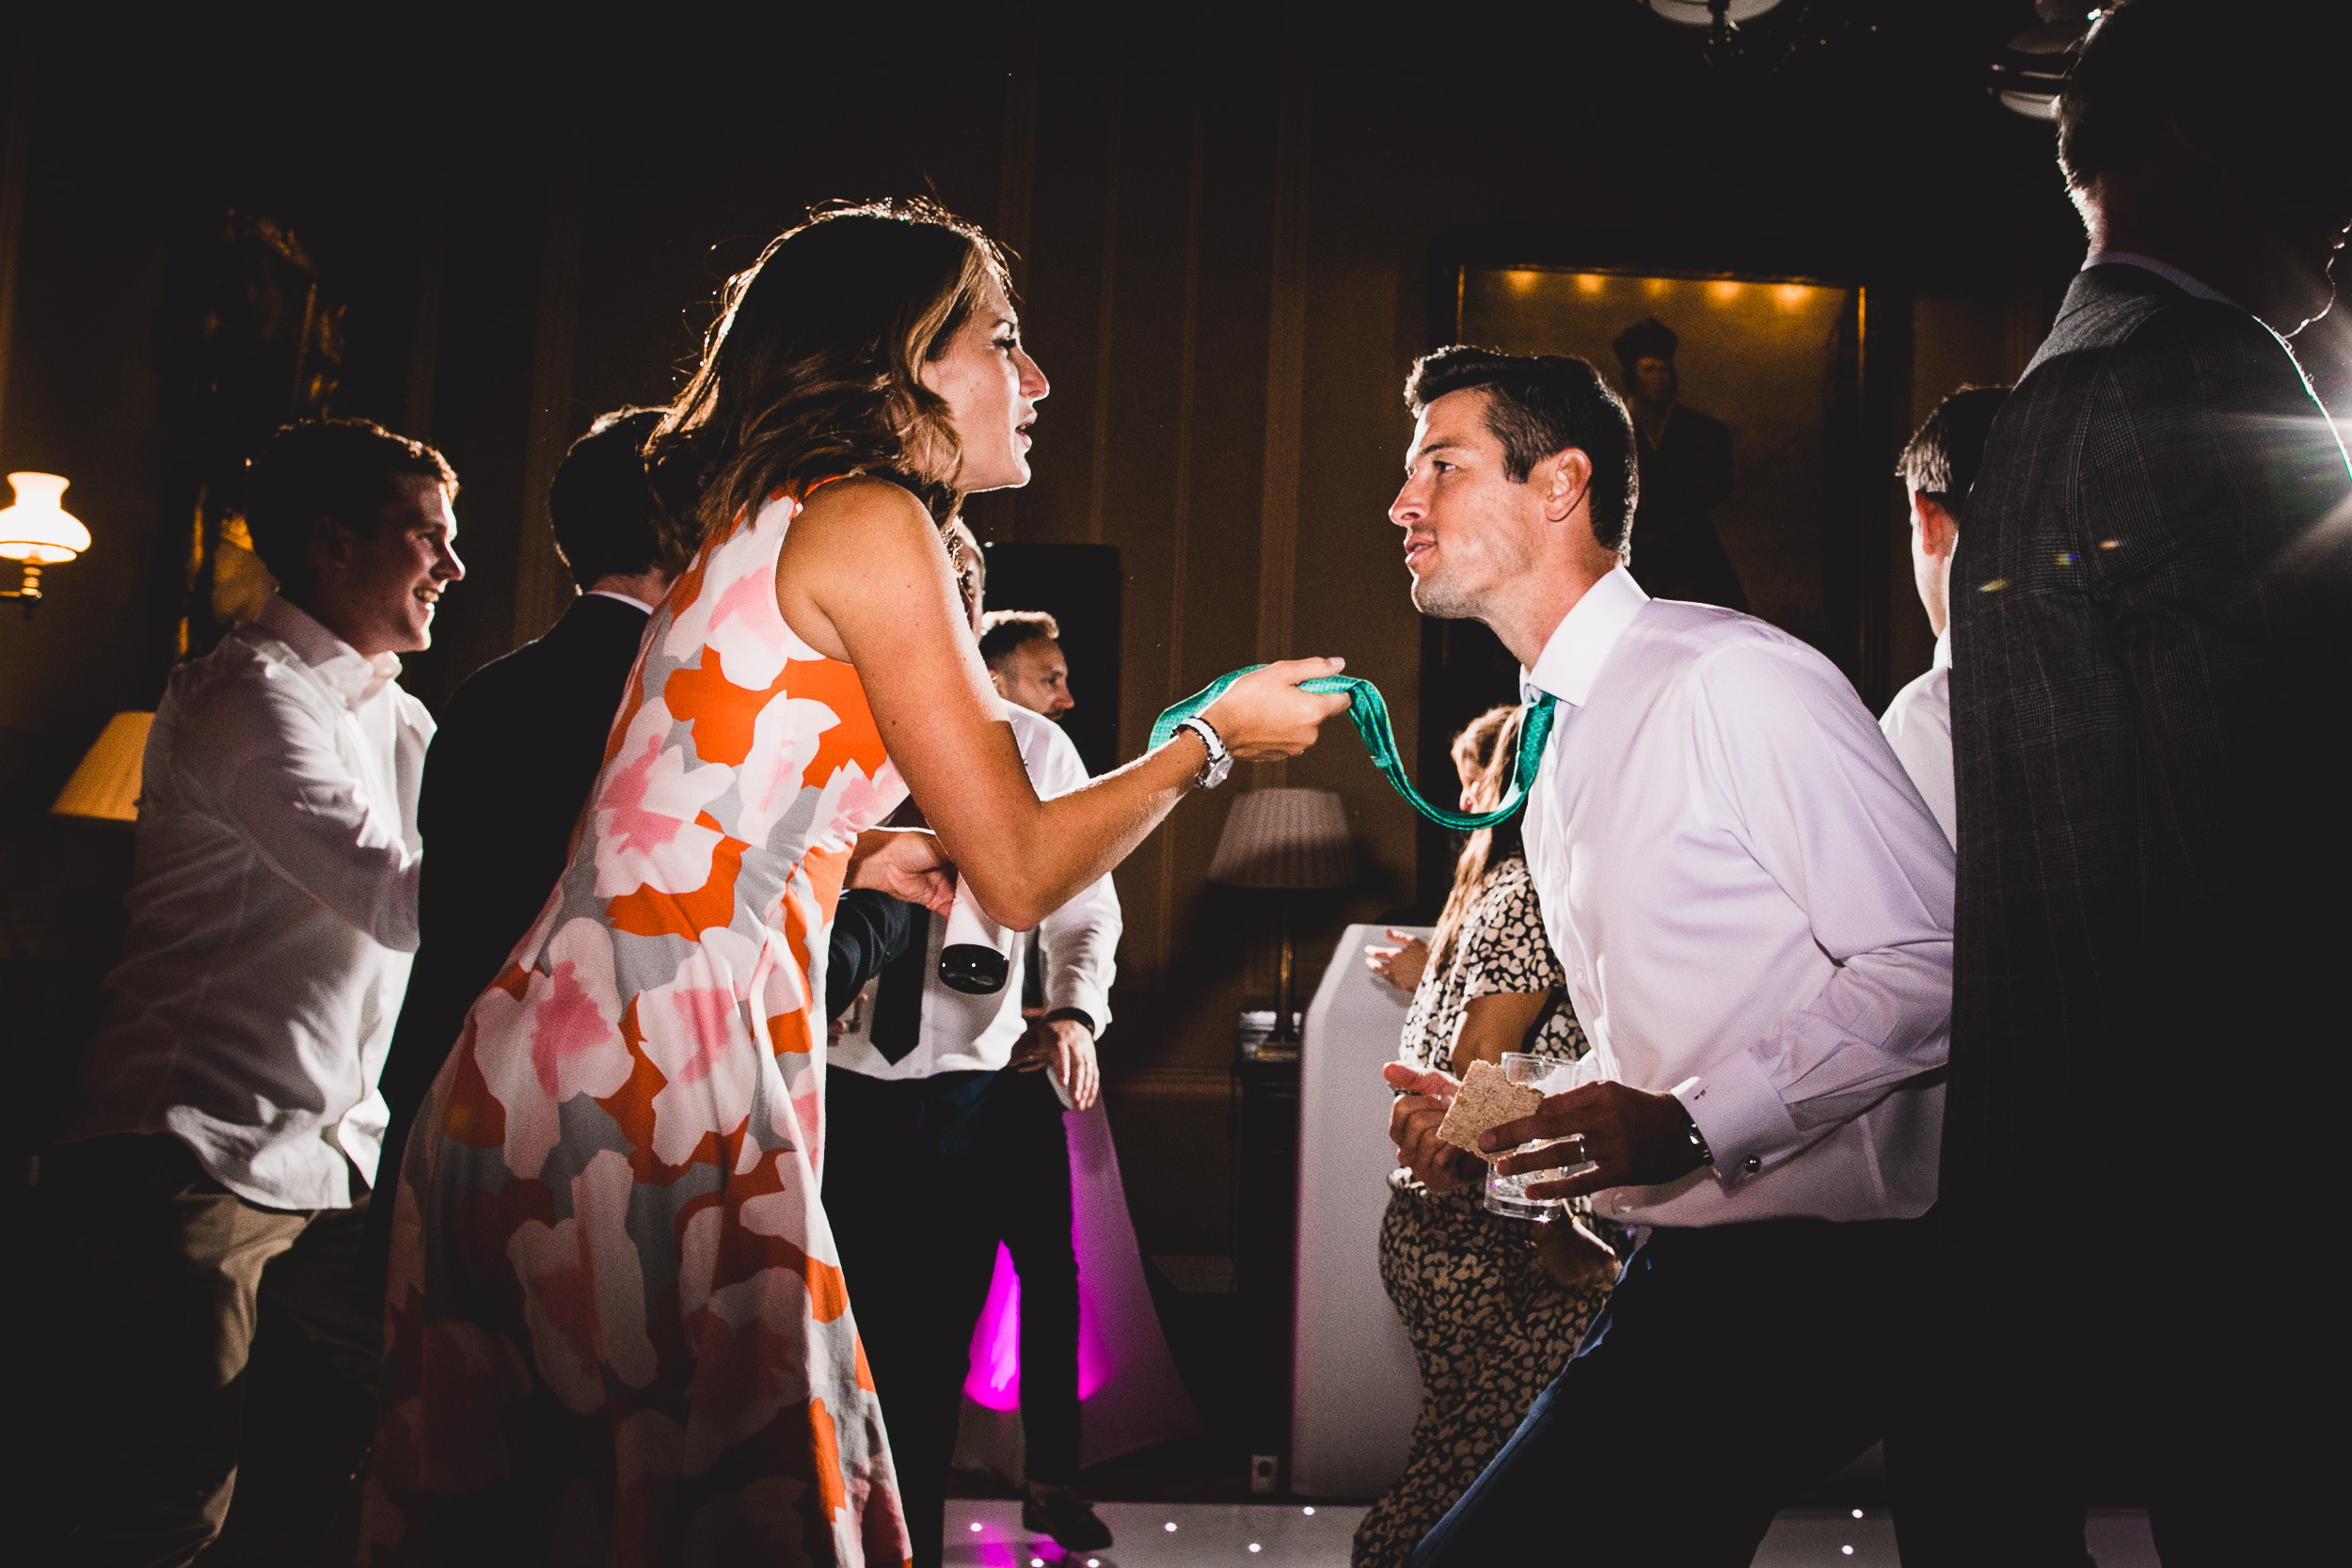 A groom and bride dancing at their wedding reception.